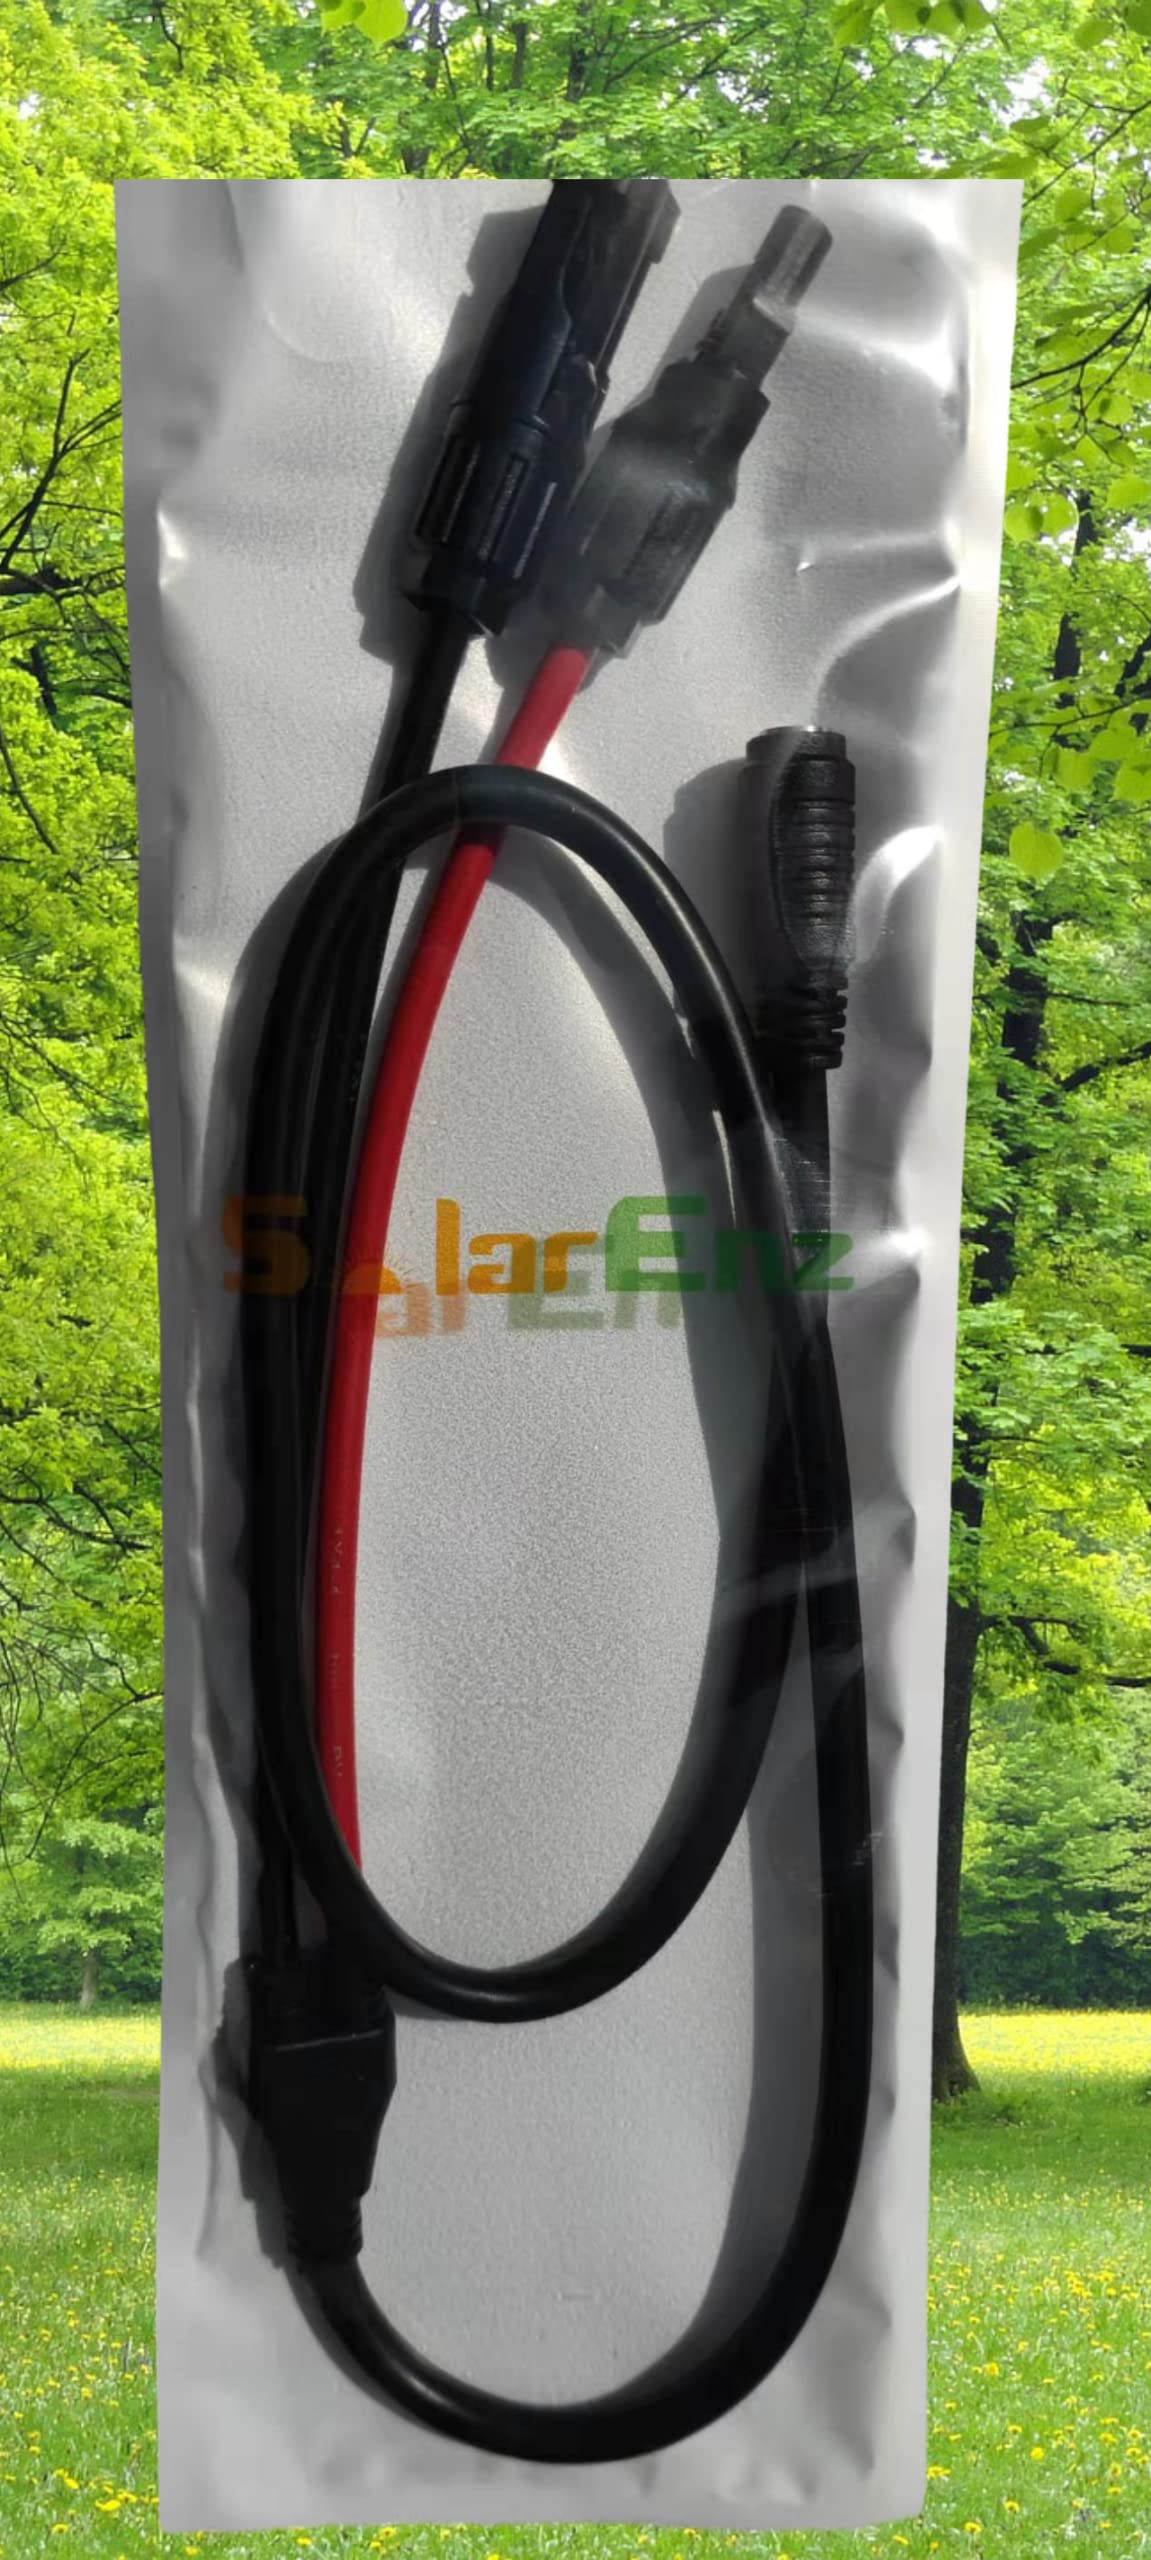 SolarEnz DC 8mm Female Adapter Adapter Cable Solar Connector Converter Perfect Compatible for 100W Portable Solar Panel